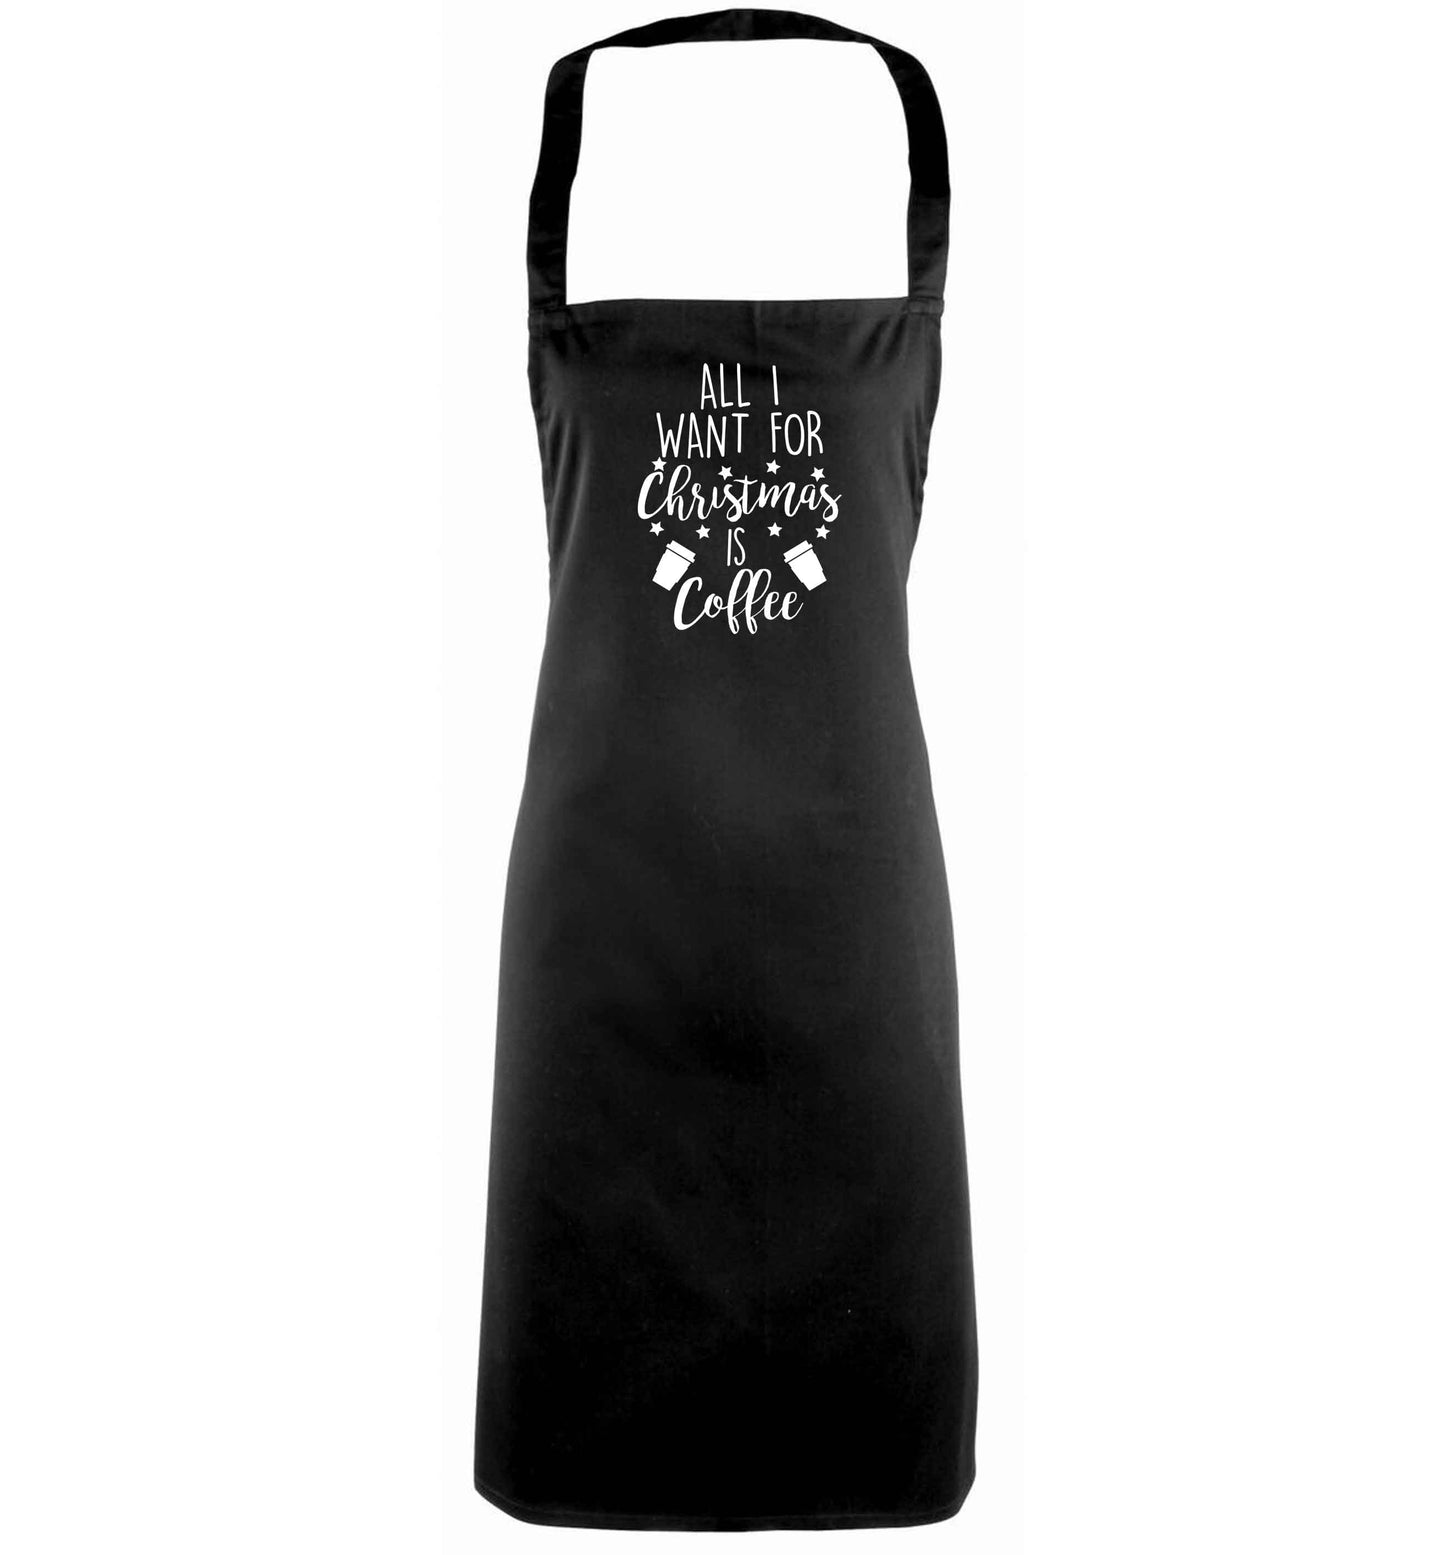 All I want for Christmas is coffee black apron